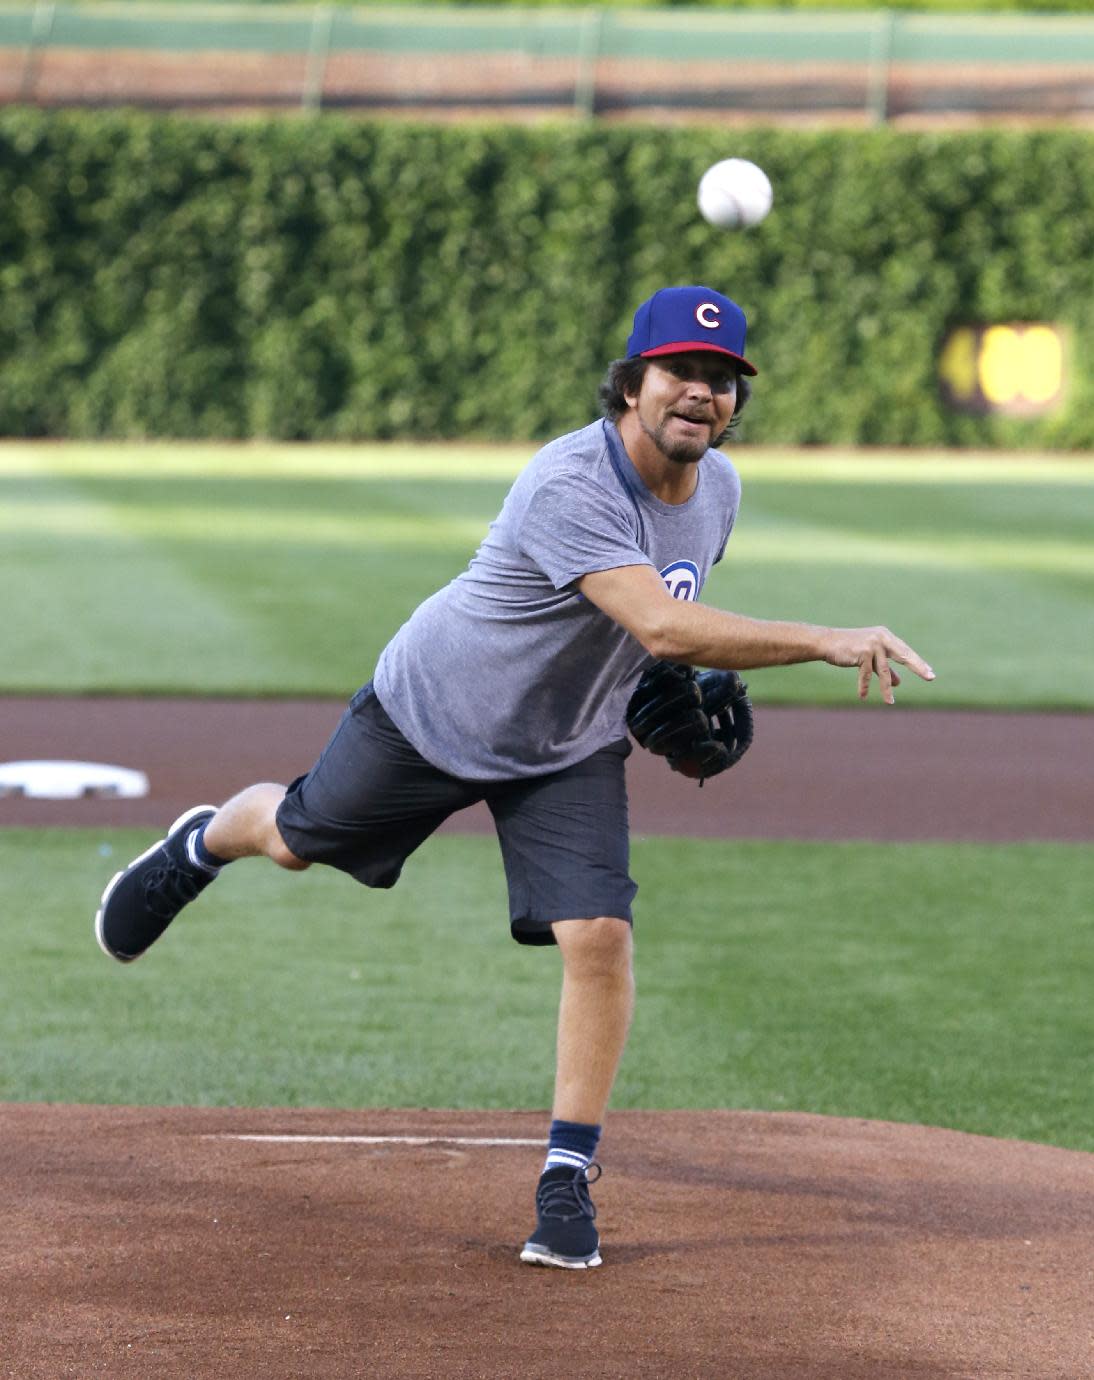 Eddie Vedder wore a batting helmet to throw a first pitch for the